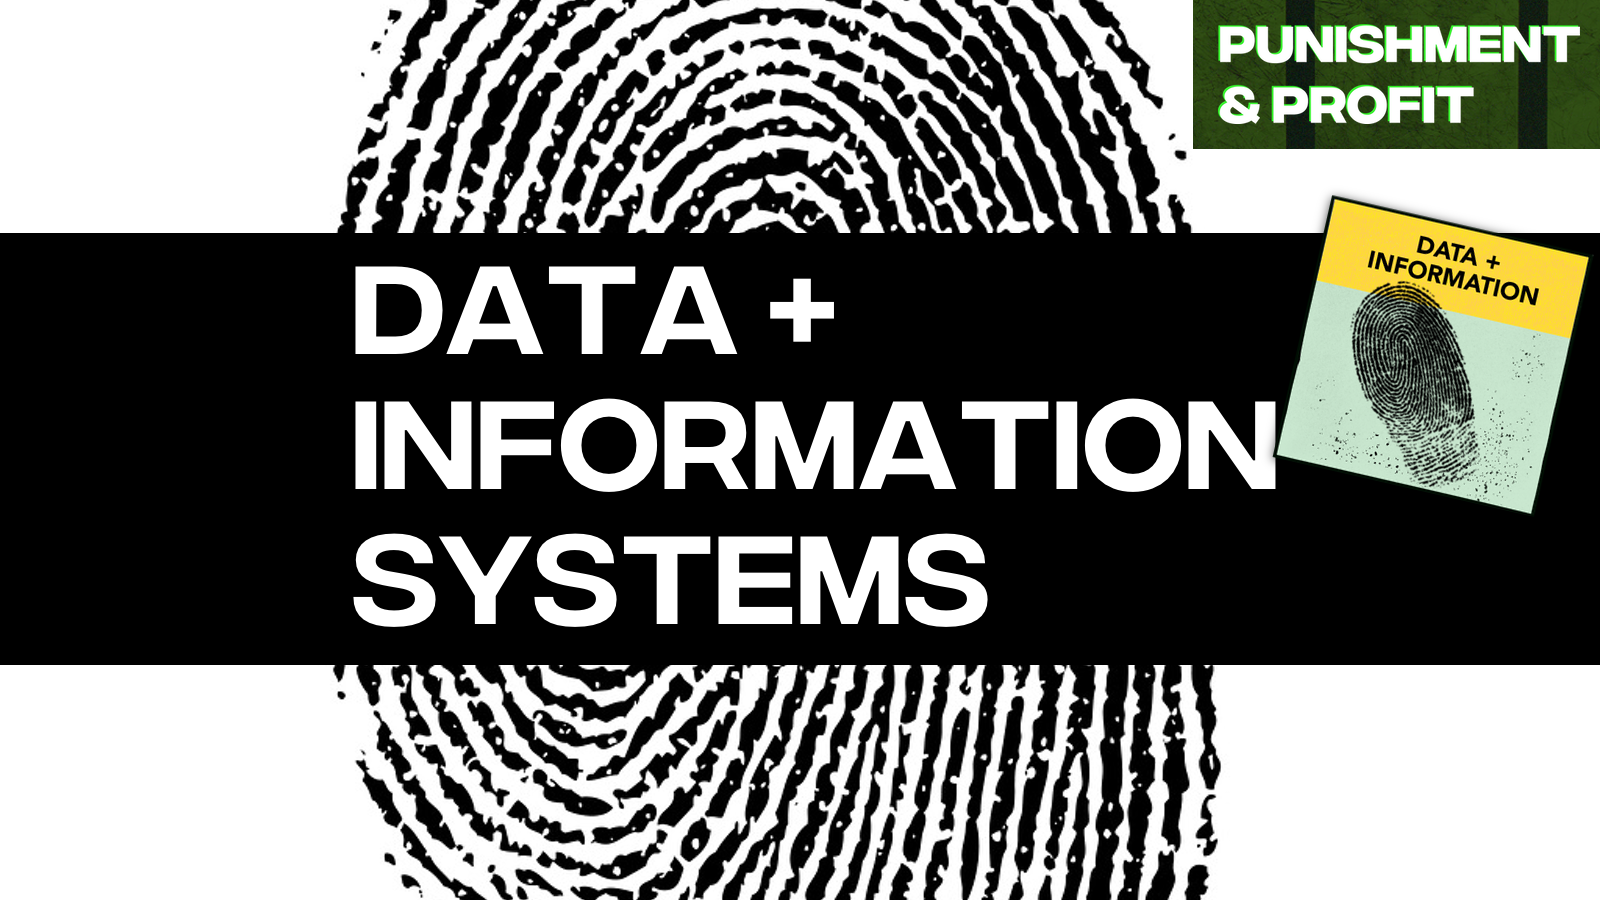 Punishment & Profit: Data and Information Systems